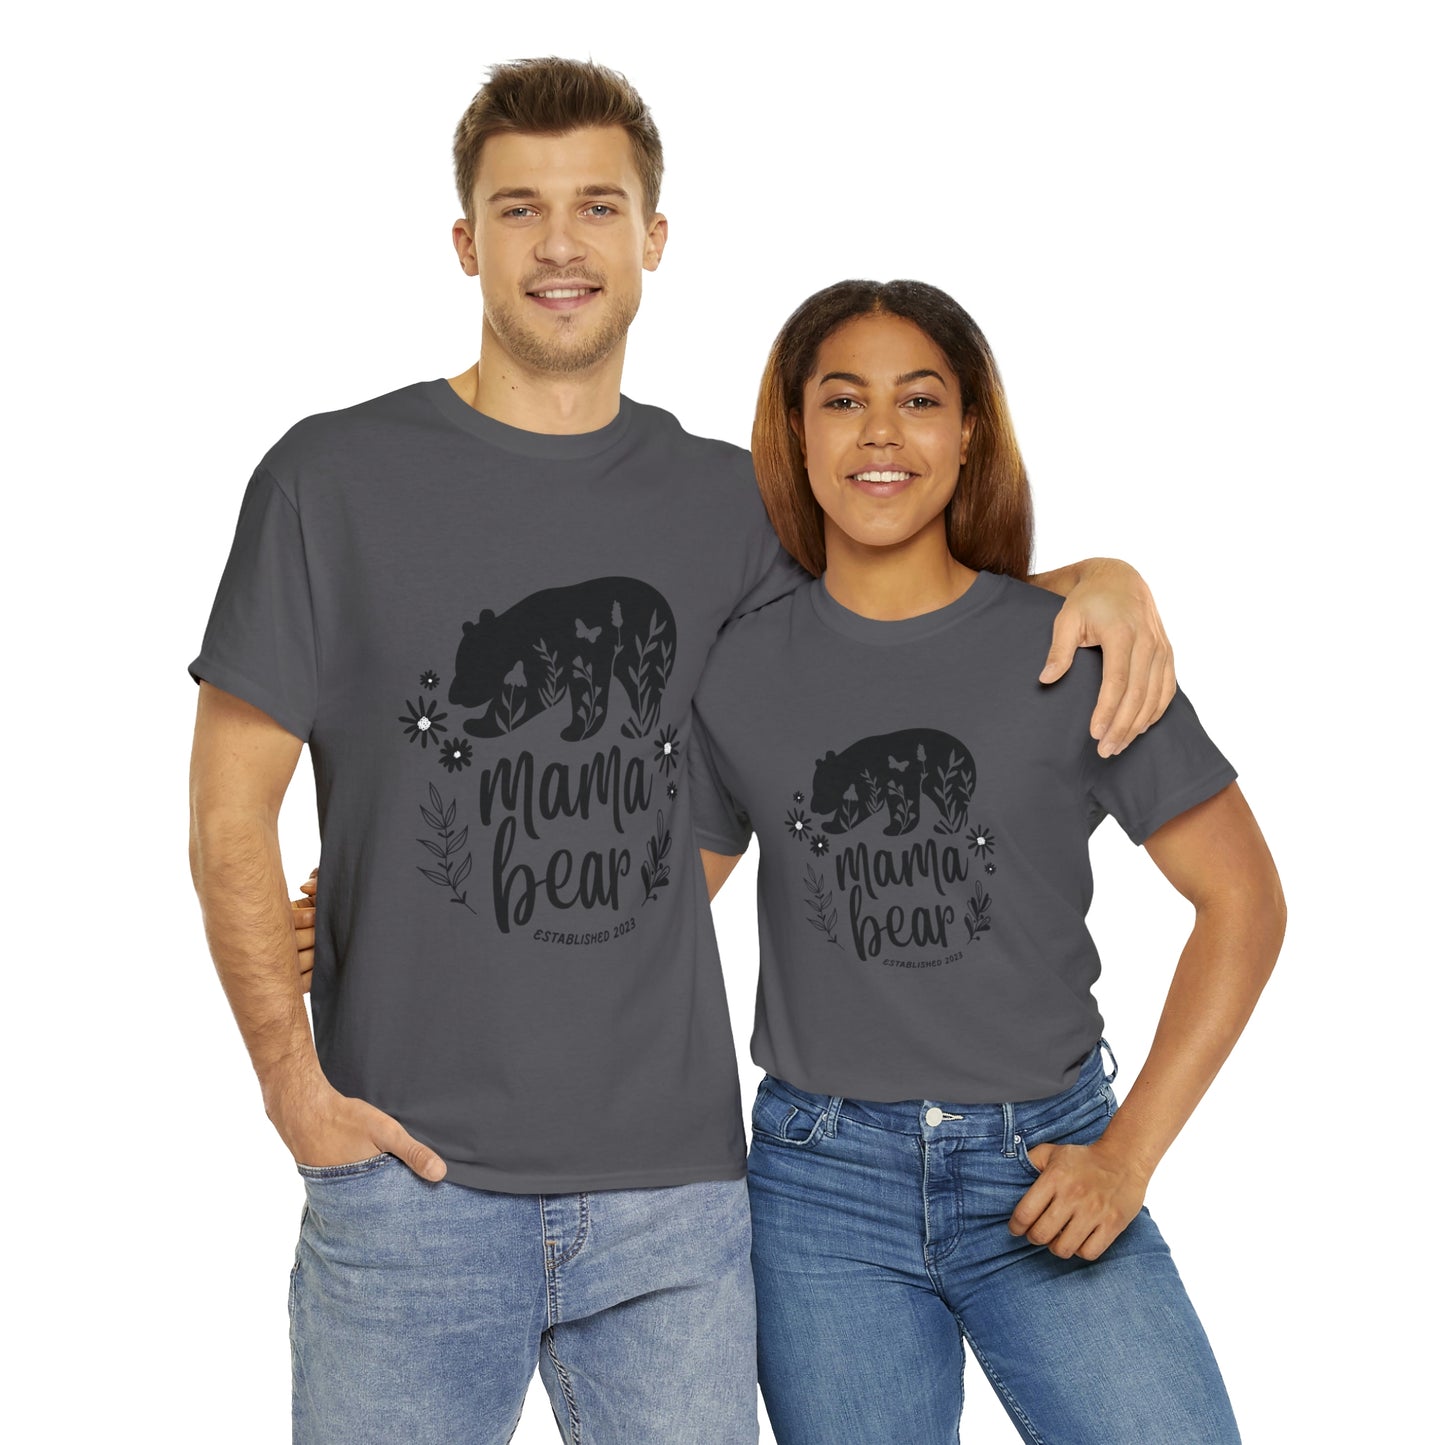 mama bear Your Style  Our Custom Printed Tee Unique Design Comfortable Fit Personalized for You color funny tshirt tee shirt motivation